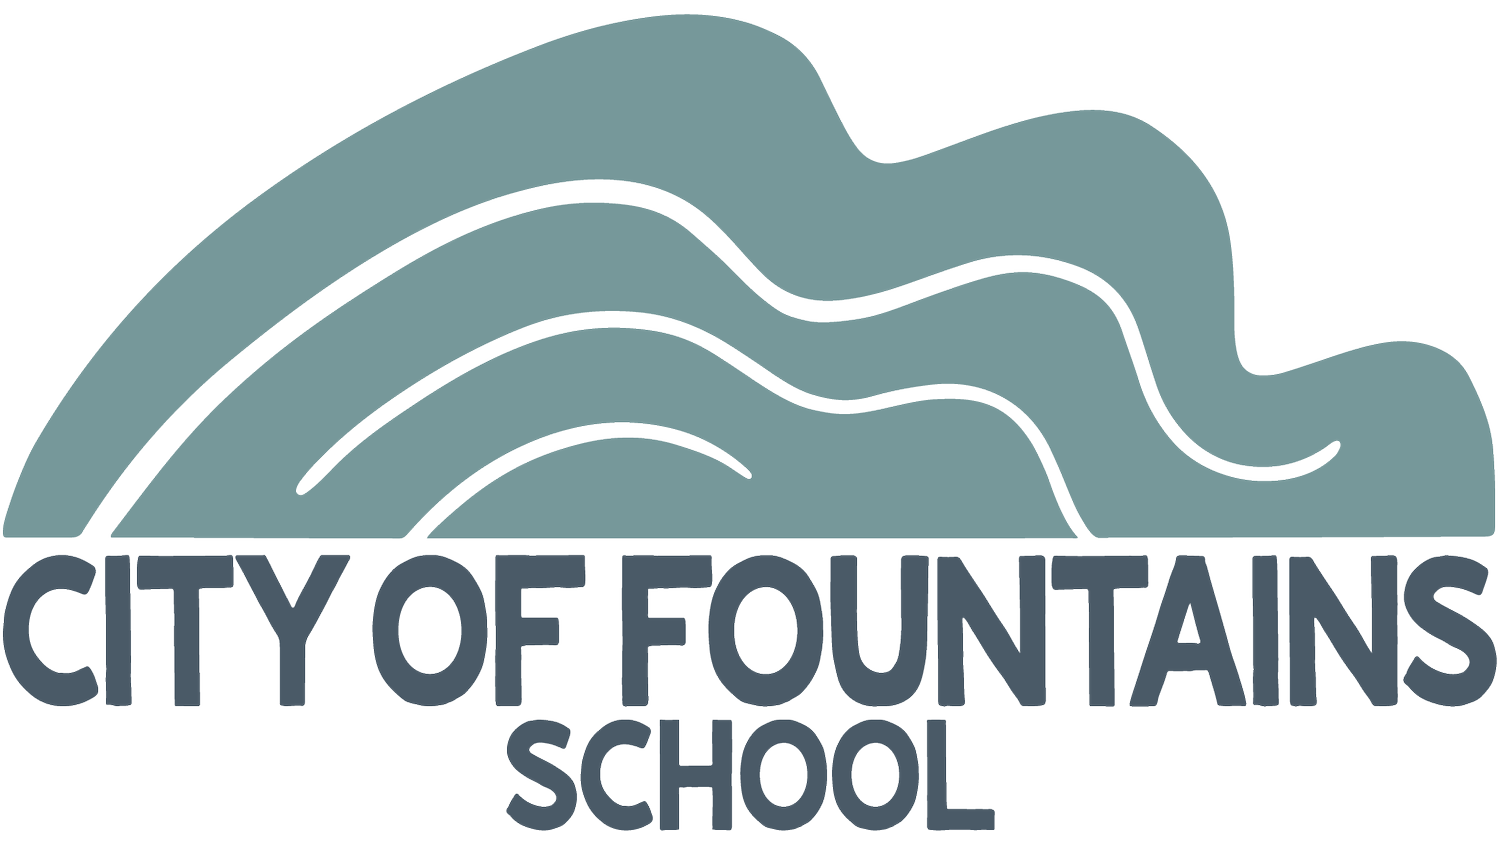 City of Fountains School